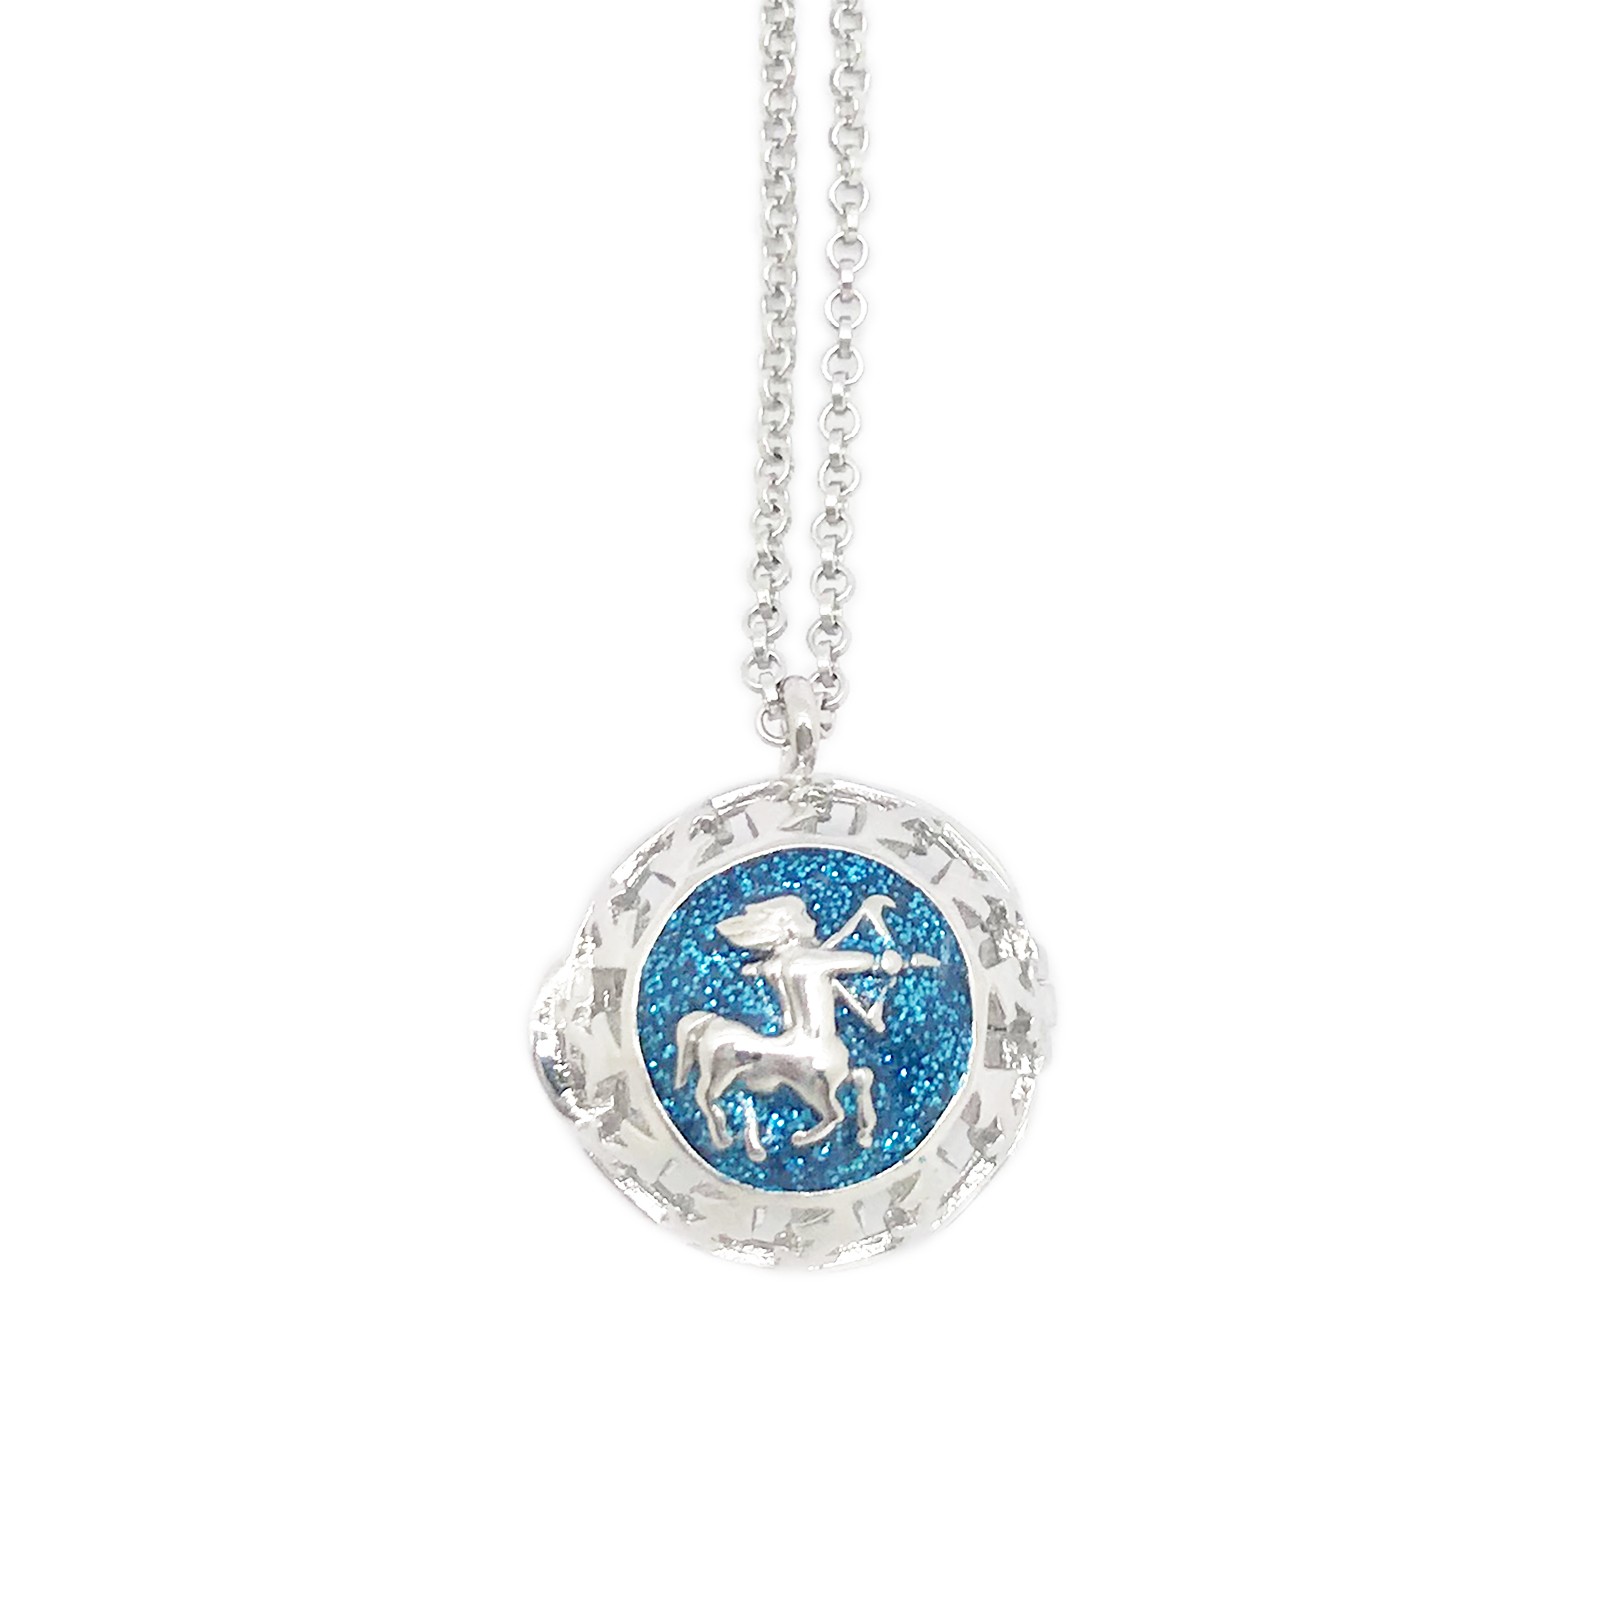 Sagittarius Necklace with Charm Pendant | Linjer Jewelry